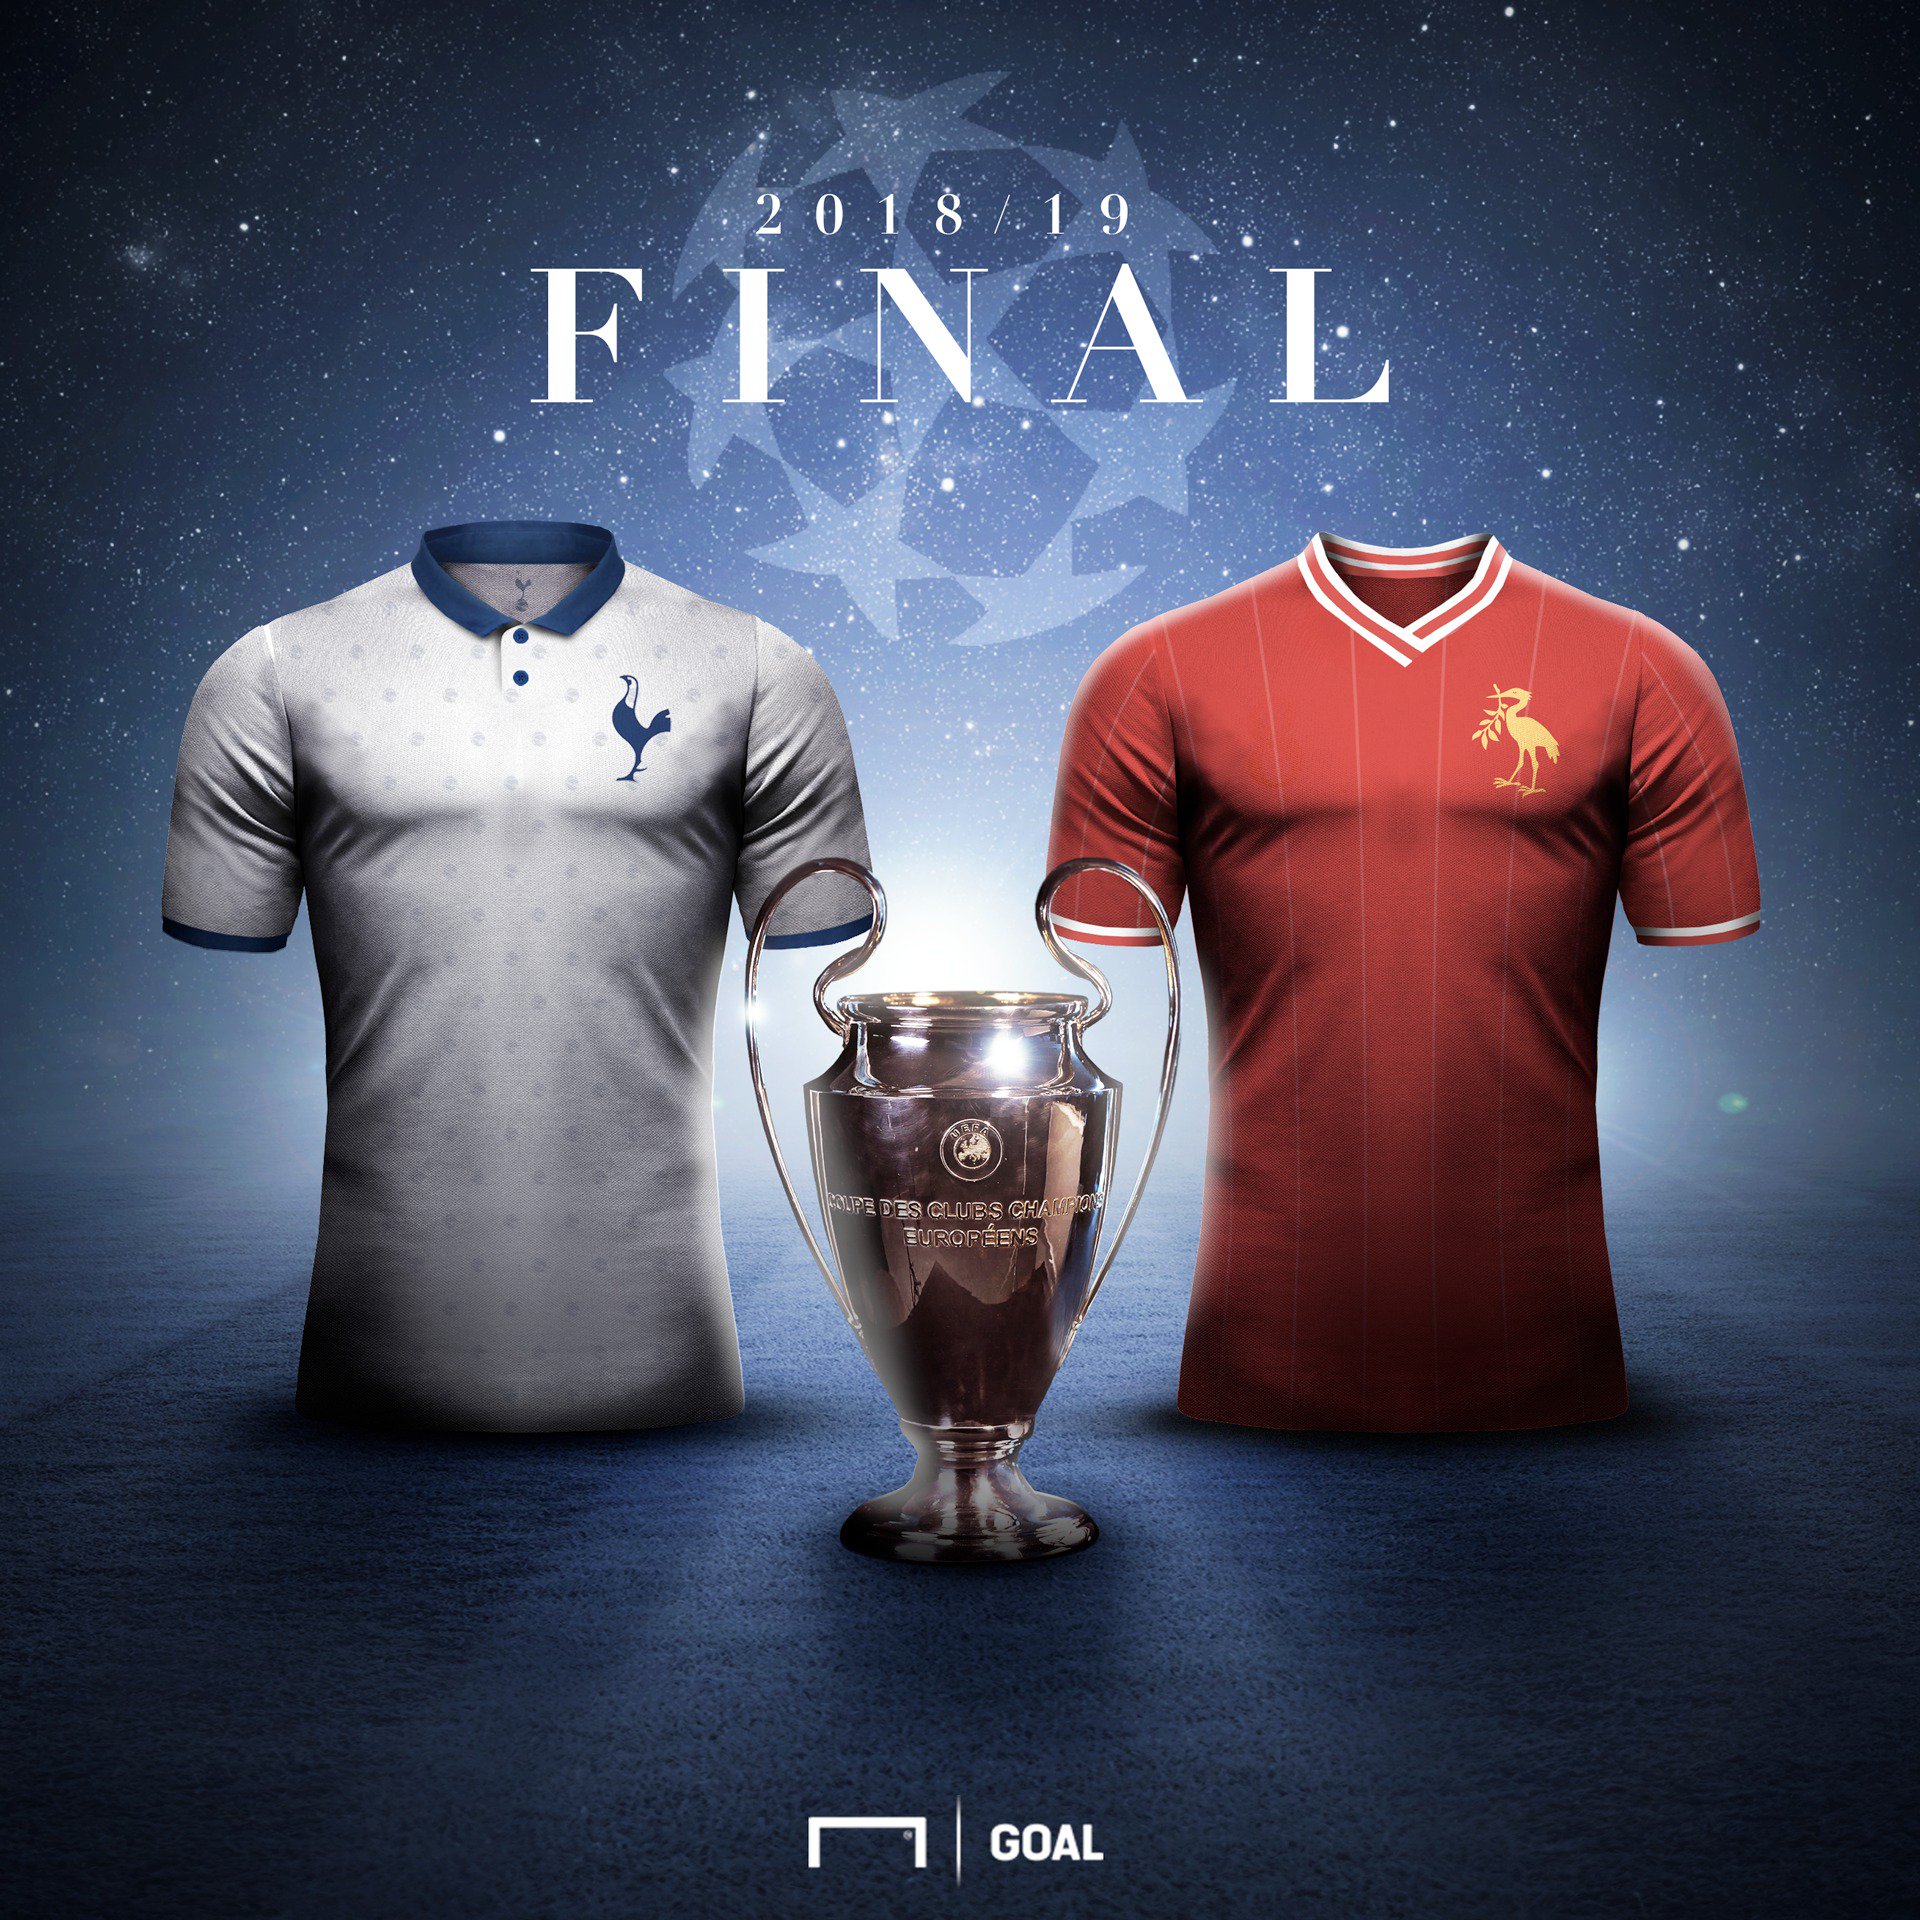 UEFA Champions League on X: Your 2018/19 #UCL quarter-finalists 🙌 🇳🇱  @AFCAjax 🇪🇸 @FCBarcelona 🇮🇹 @juventusfc 🏴󠁧󠁢󠁥󠁮󠁧󠁿 @LFC  🏴󠁧󠁢󠁥󠁮󠁧󠁿 @ManCity 🏴󠁧󠁢󠁥󠁮󠁧󠁿 @ManUtd 🇵🇹 @FCPorto 🏴󠁧󠁢󠁥󠁮󠁧󠁿  @SpursOfficial Who are you backing to